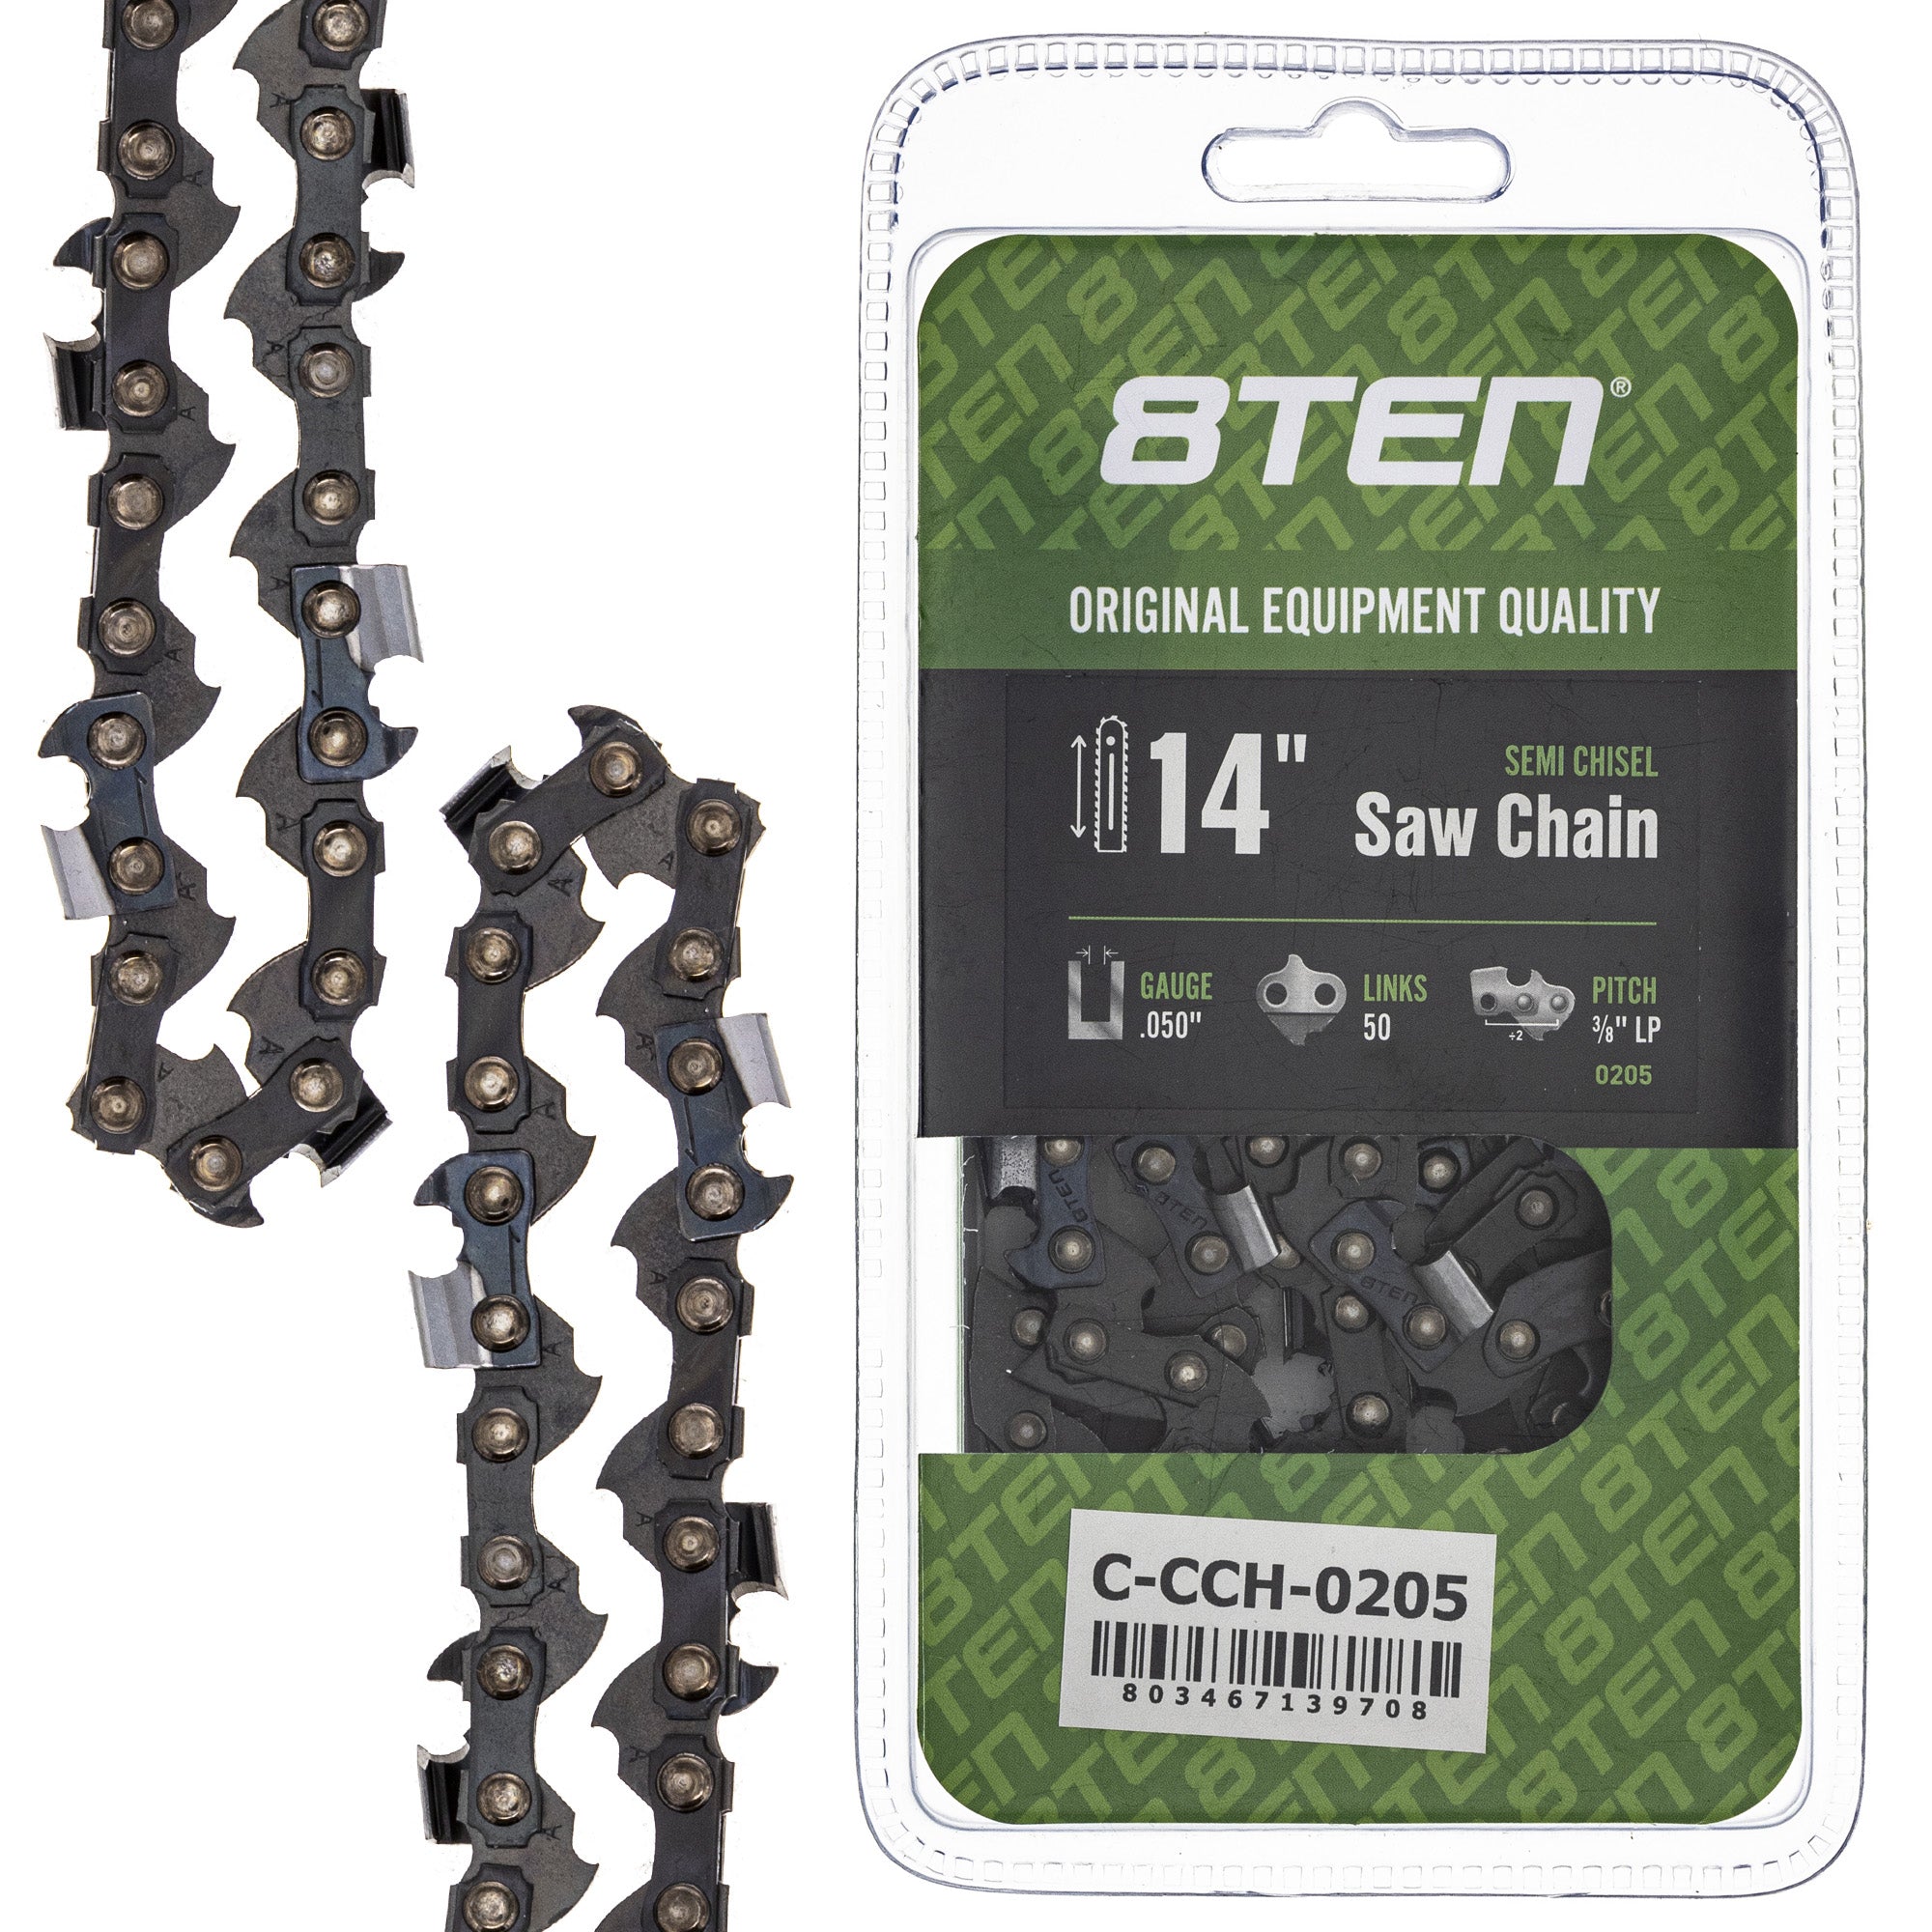 8TEN MK1010413 Guide Bar & Chain for OLE MSE MS Mac